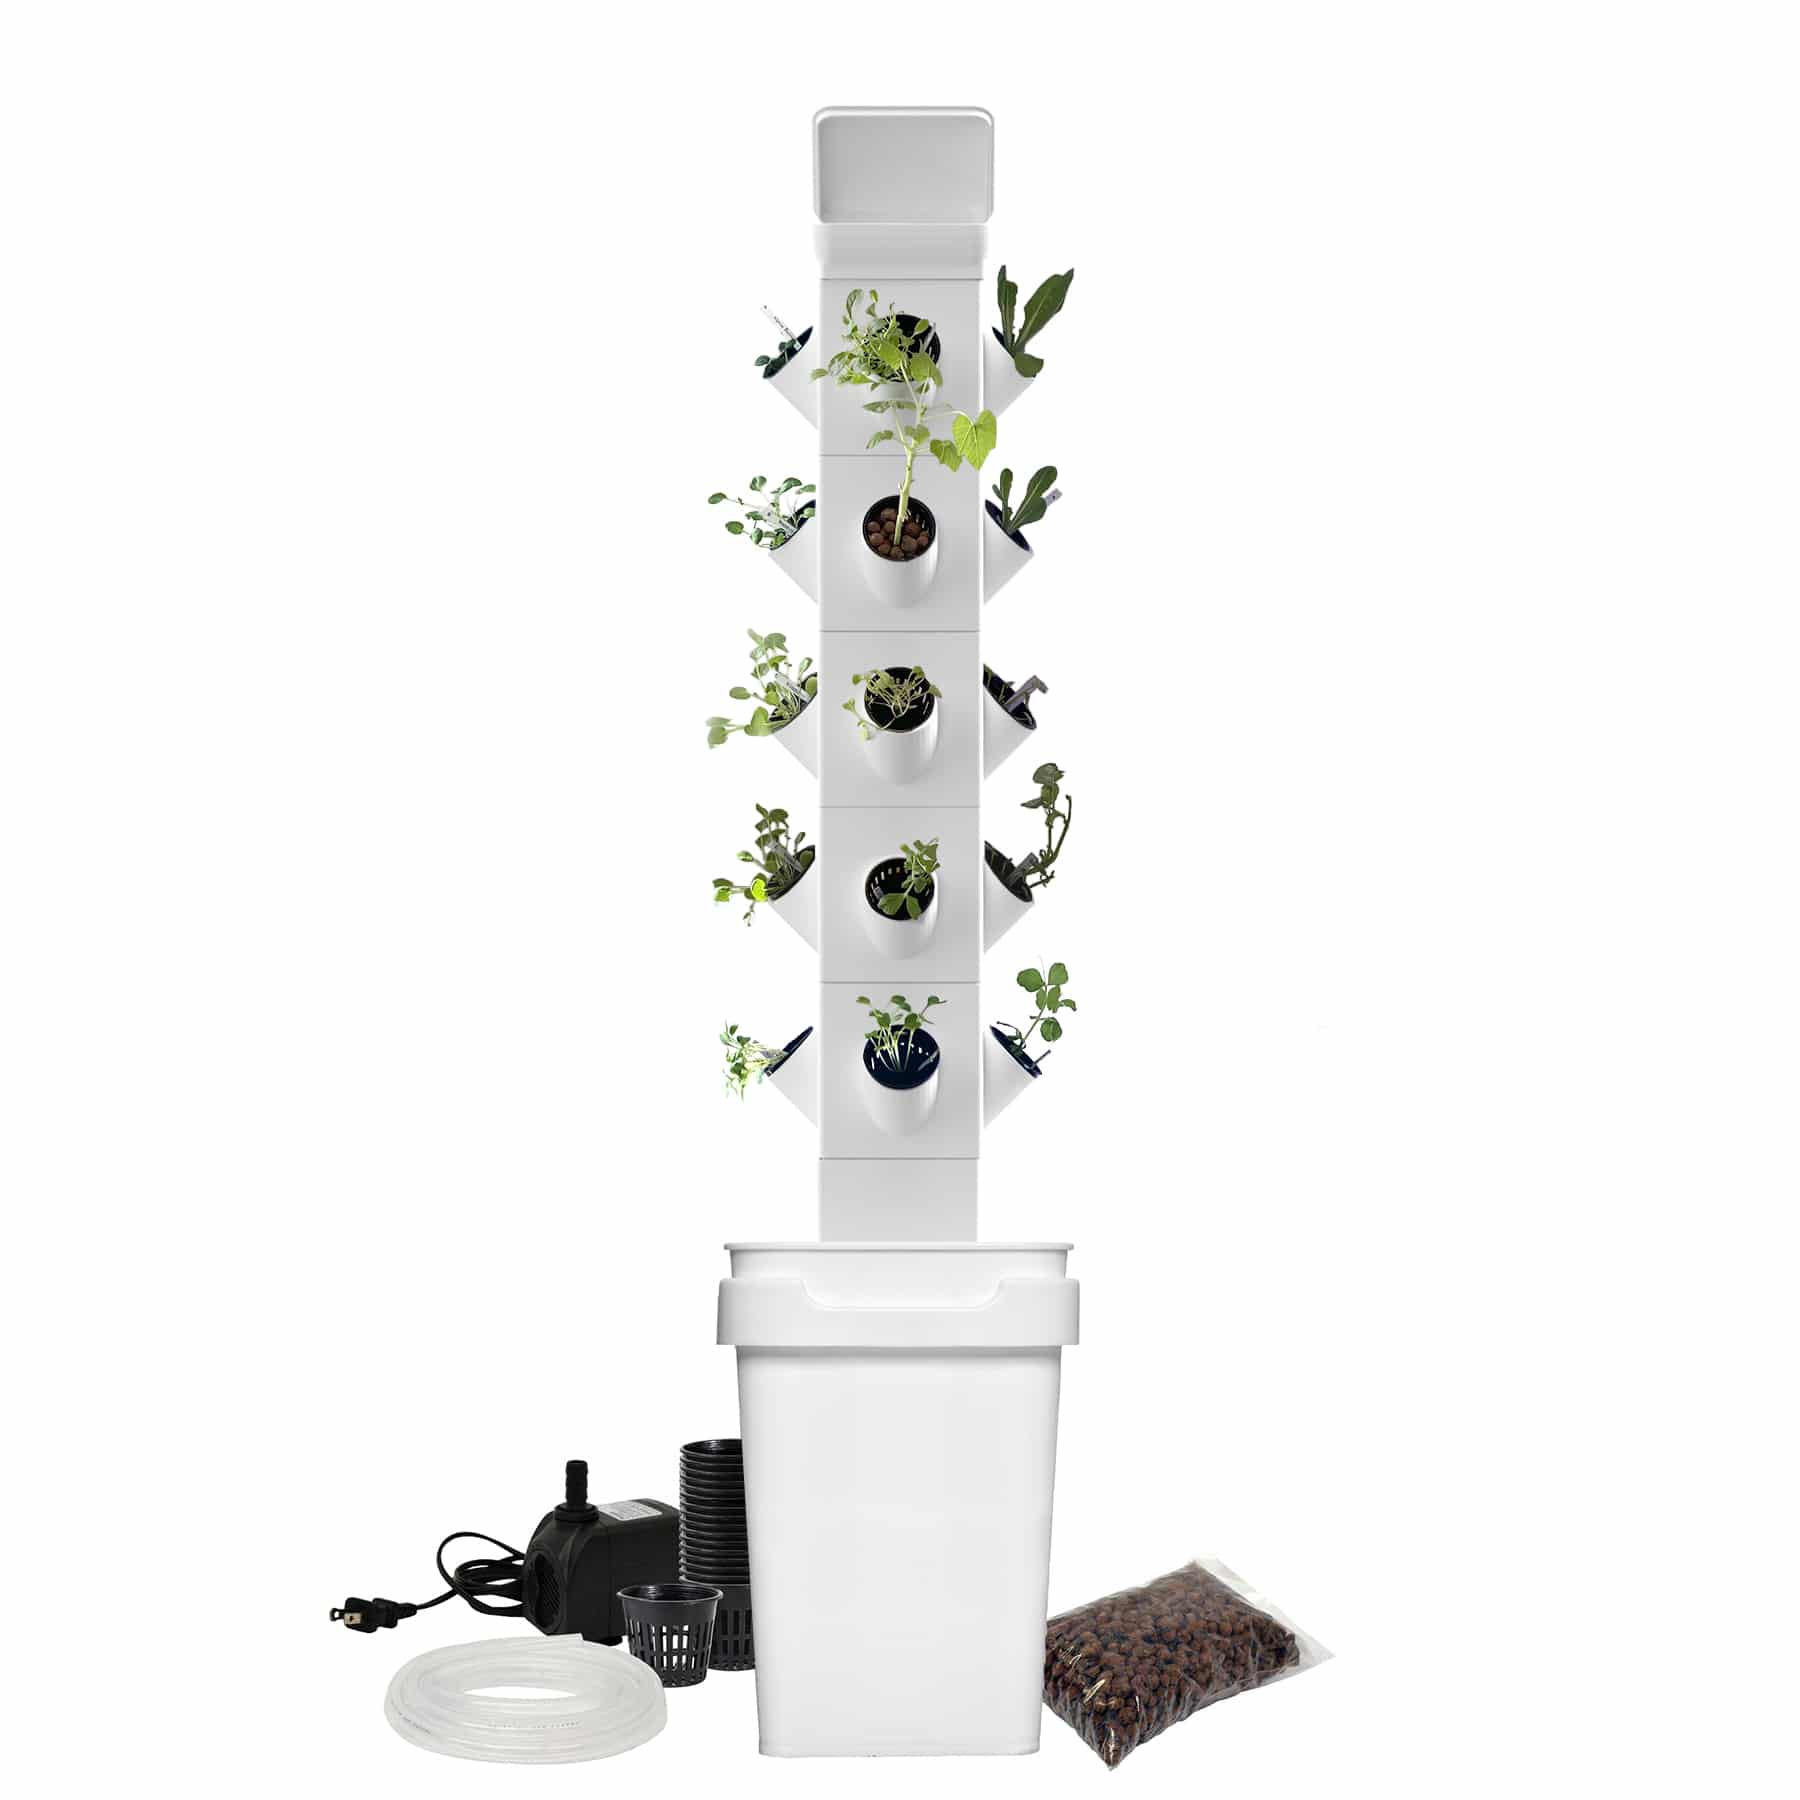 ExoTower 5-Tier Hydroponic Garden System - Green Thumb Depot